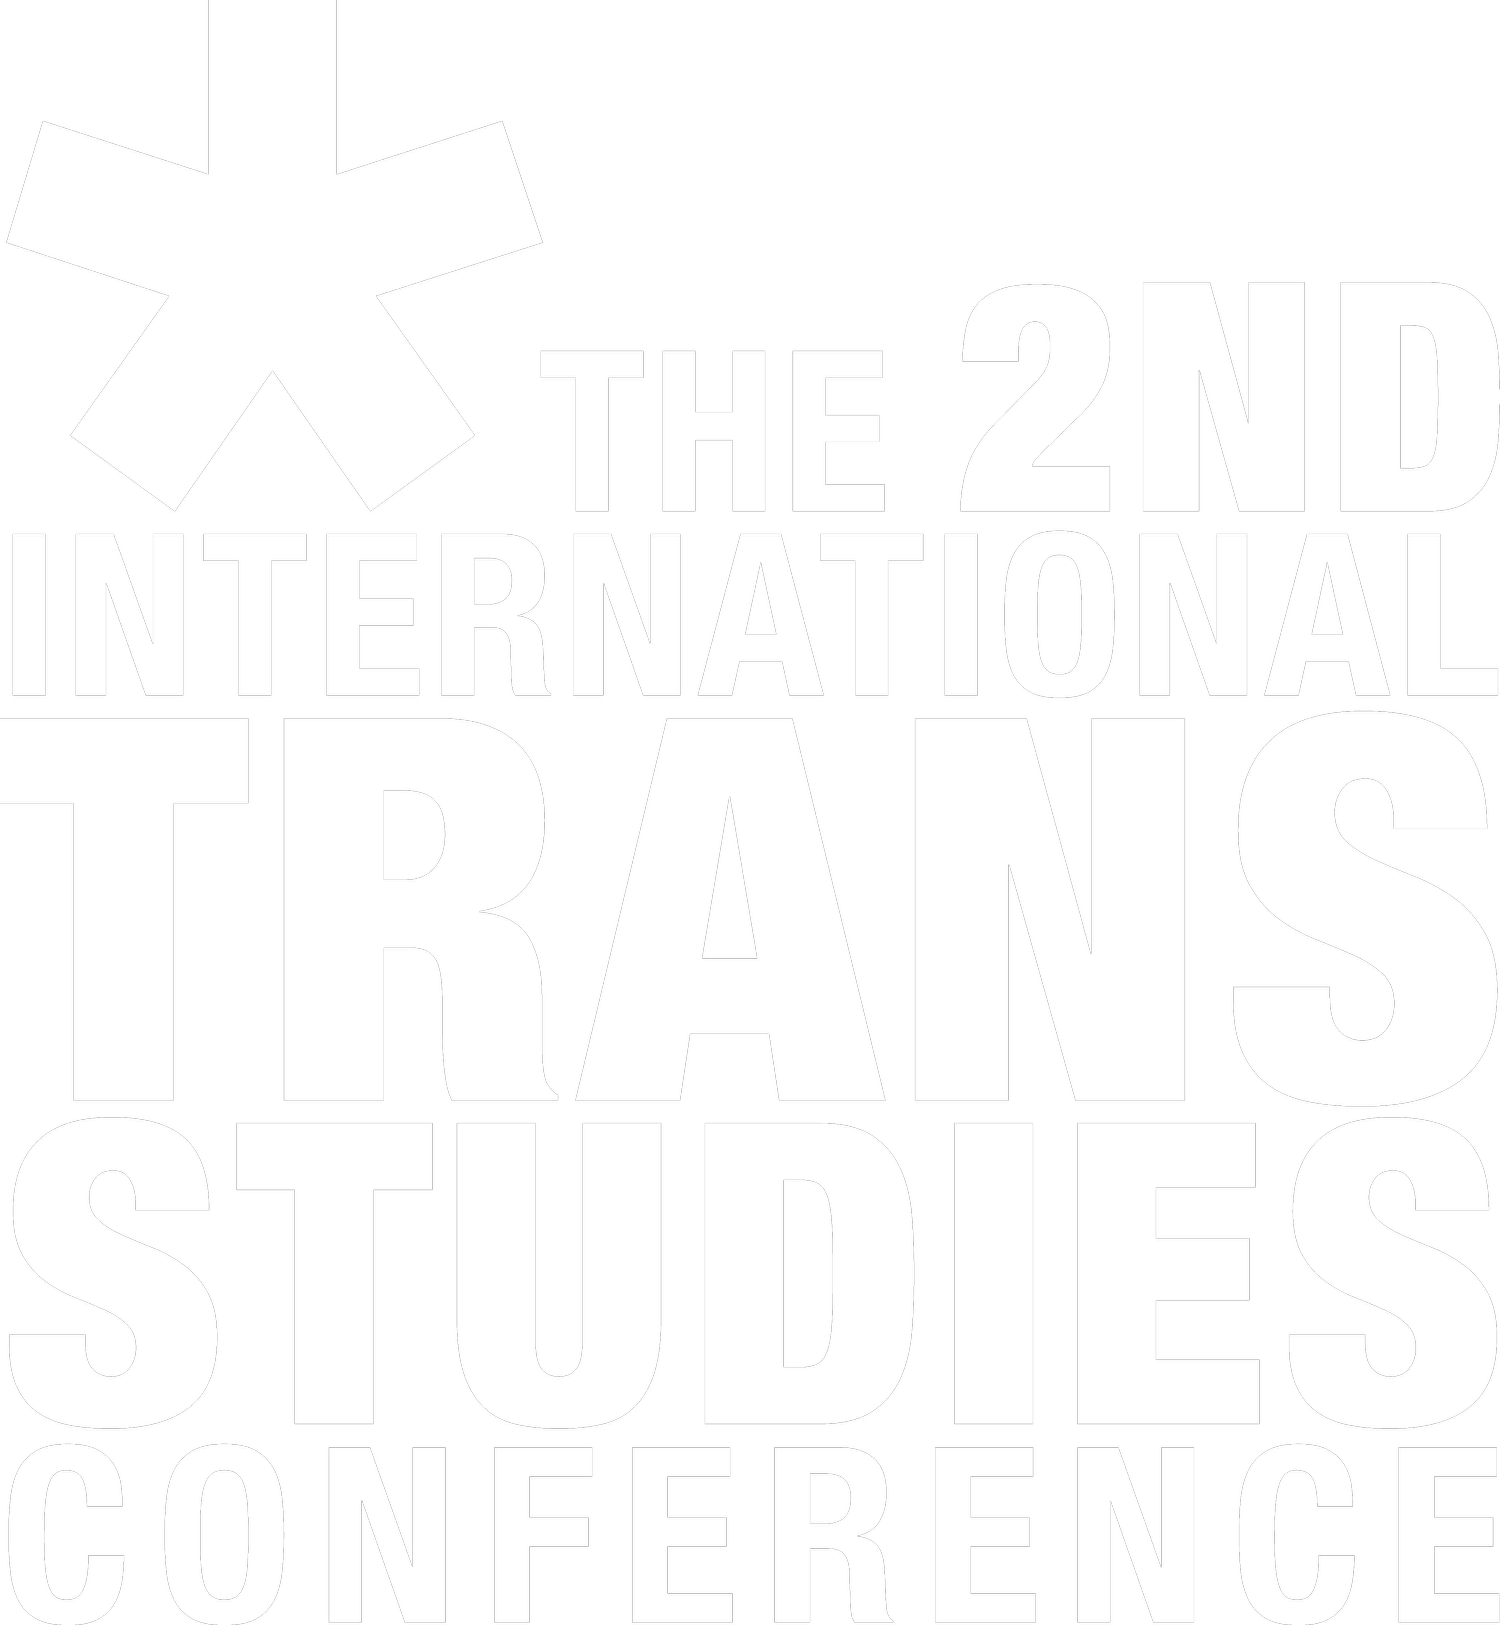 The 2nd International Trans Studies Conference